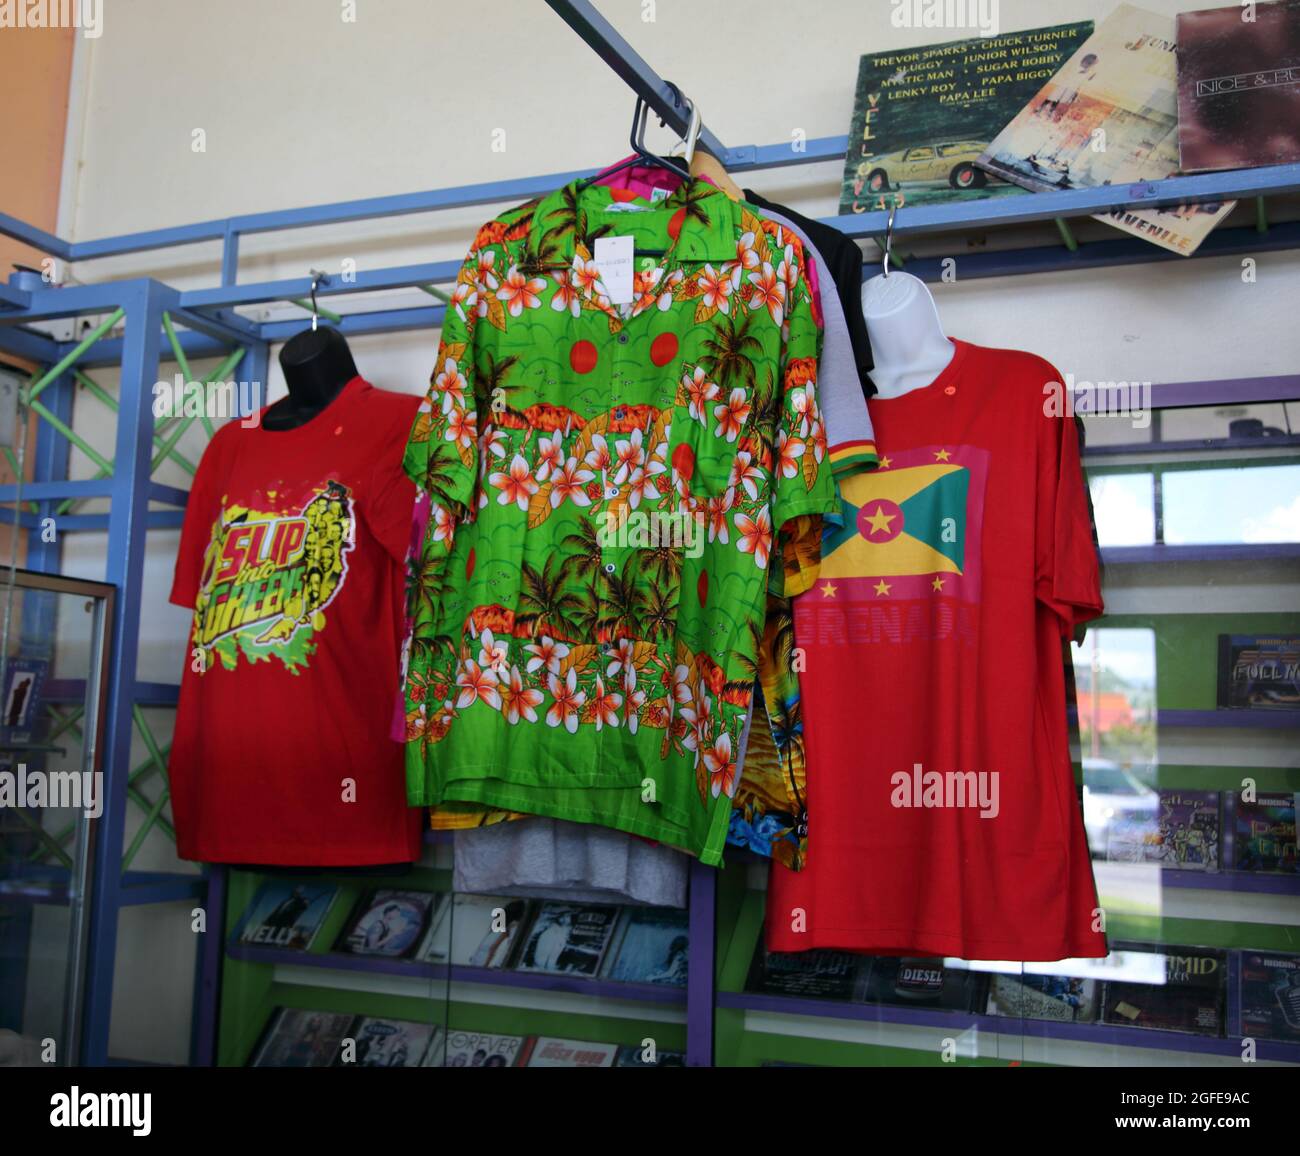 St Georges Grenada Esplanade Mall Colourful shirts On Sale in shop Stock Photo